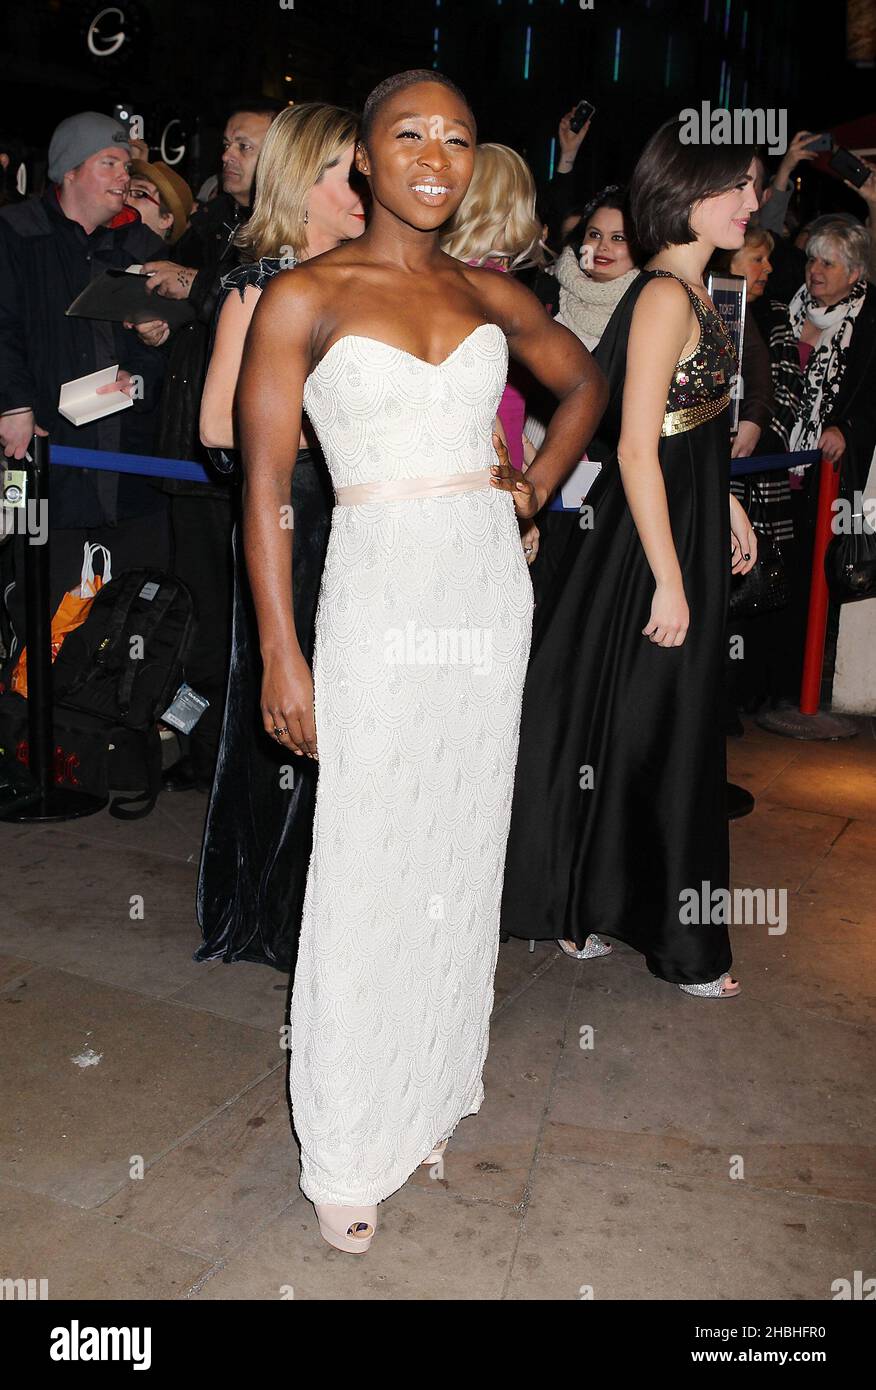 Cynthia Erivo attending the Whatsonstage.com Awards at the Prince of Wales Theatre in Central London. Stock Photo